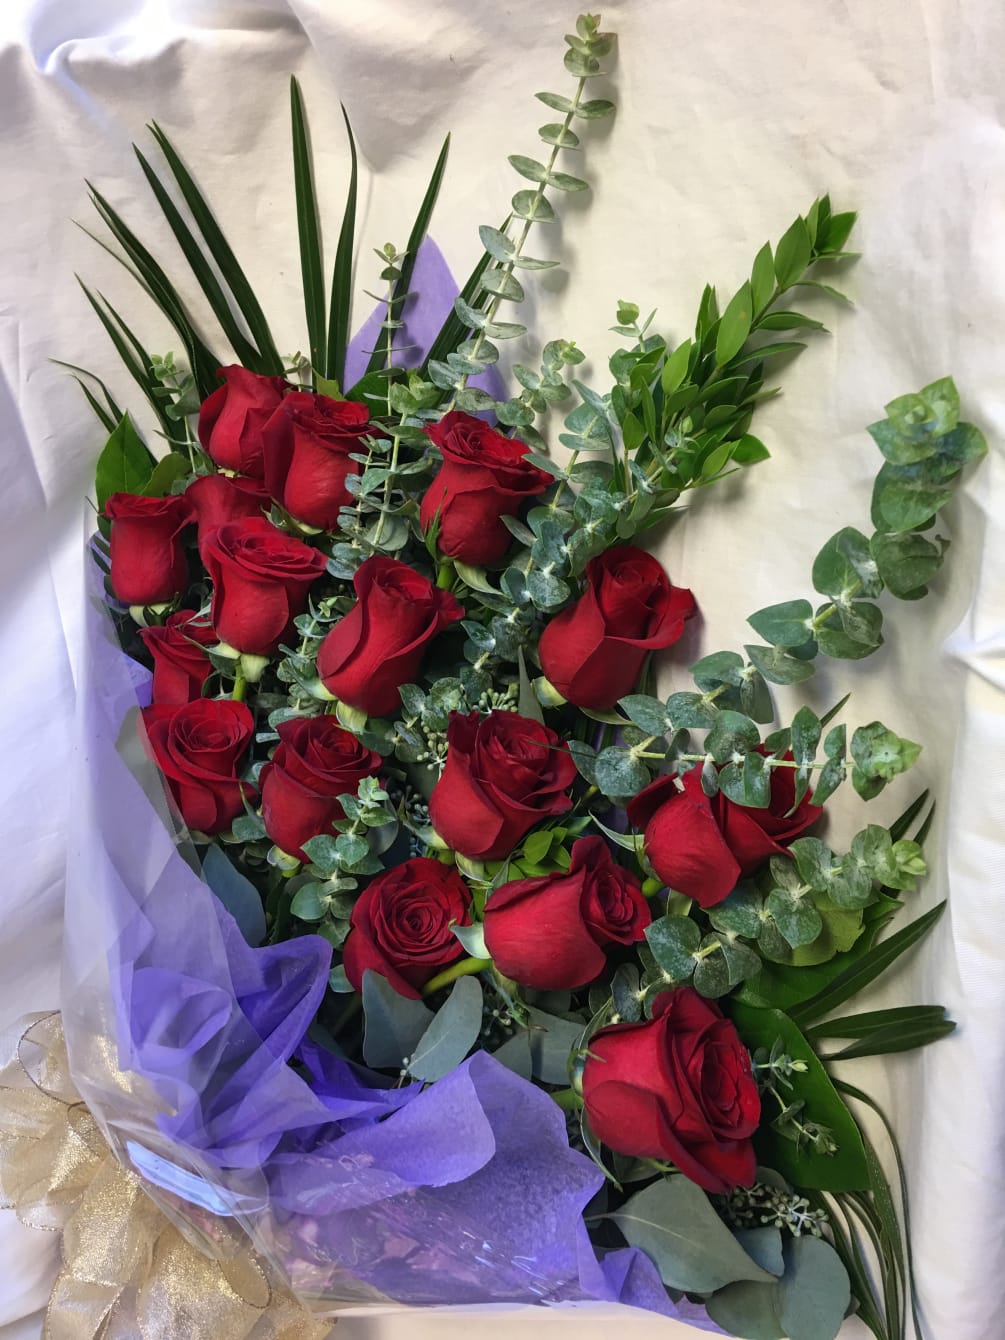 12 red roses hand-tied with greenery wrapped neatly in clear cellophane. Color